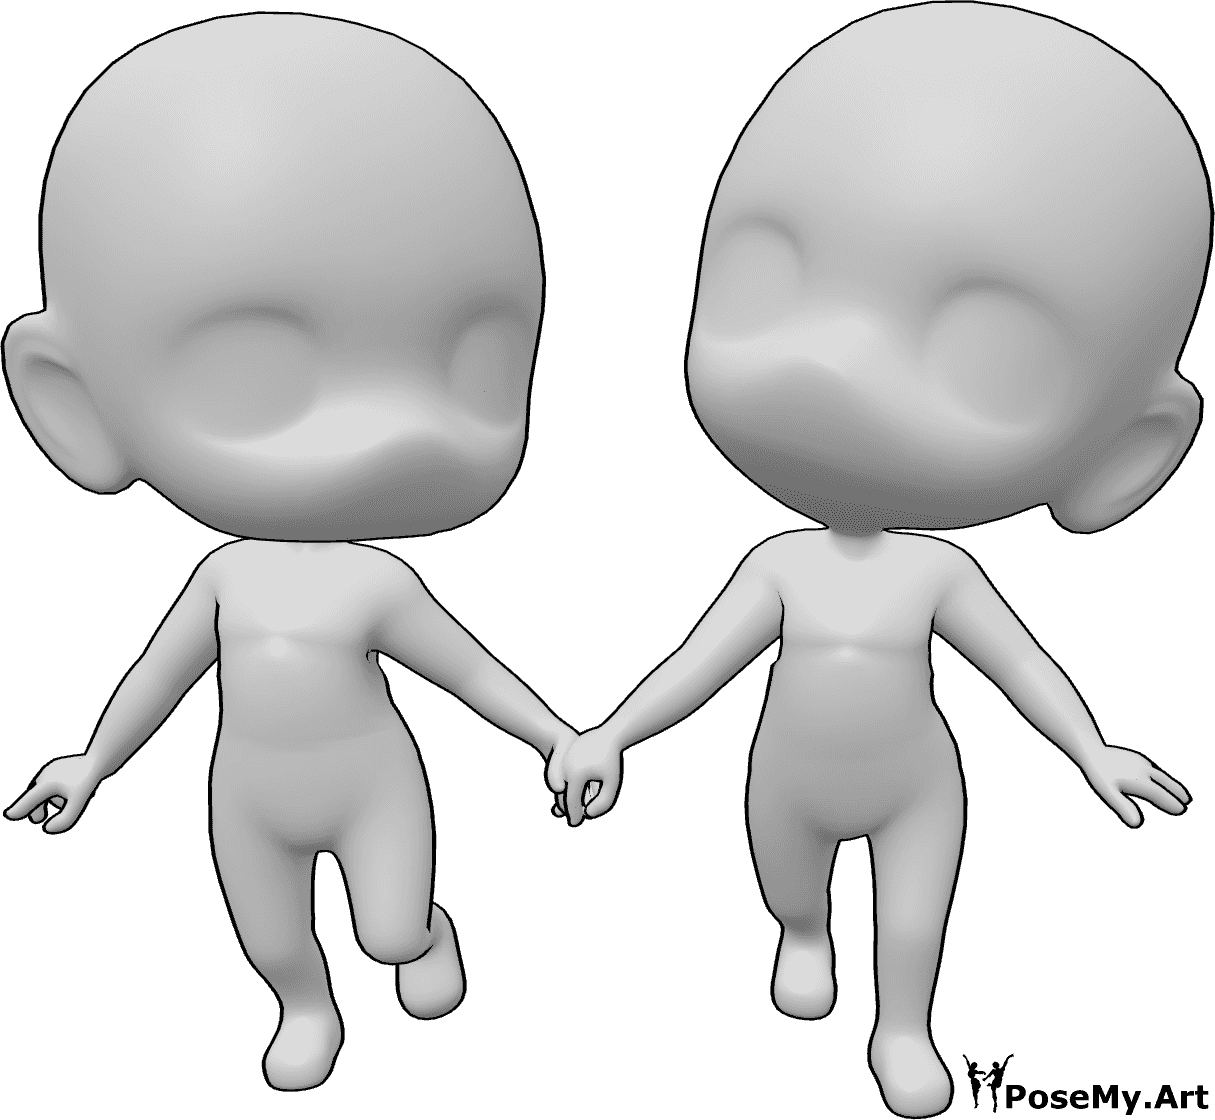 Pose Reference- Happy chibis walking pose - Two chibi is walking together happily and holding each others hands